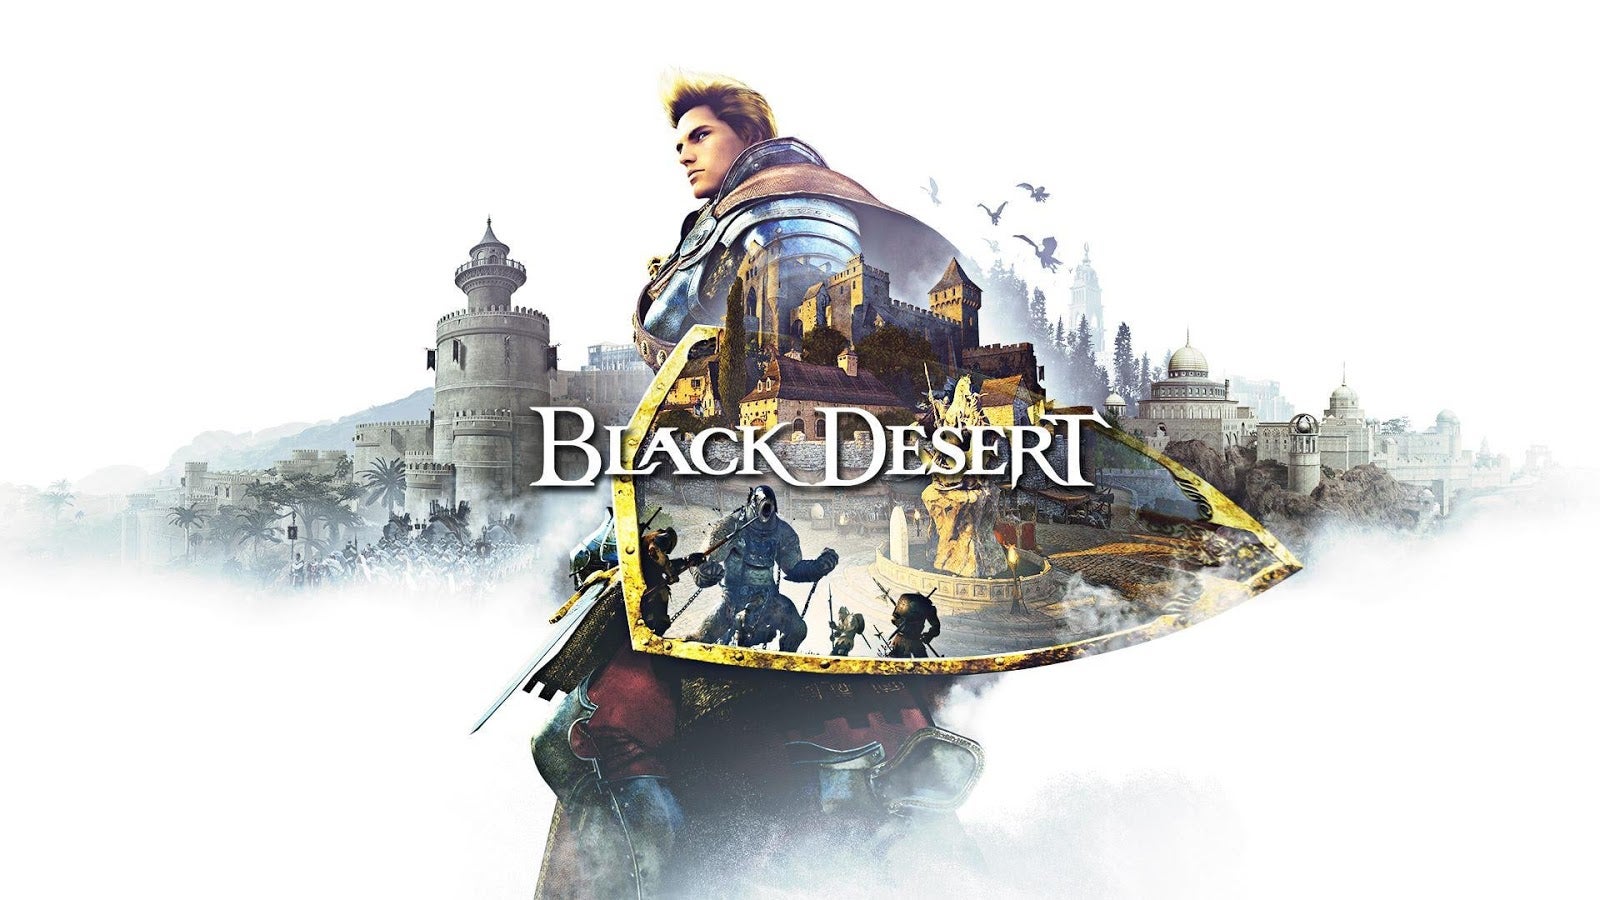 Image for Black Desert Online coming to PS4 in 2019, pre-orders start in July